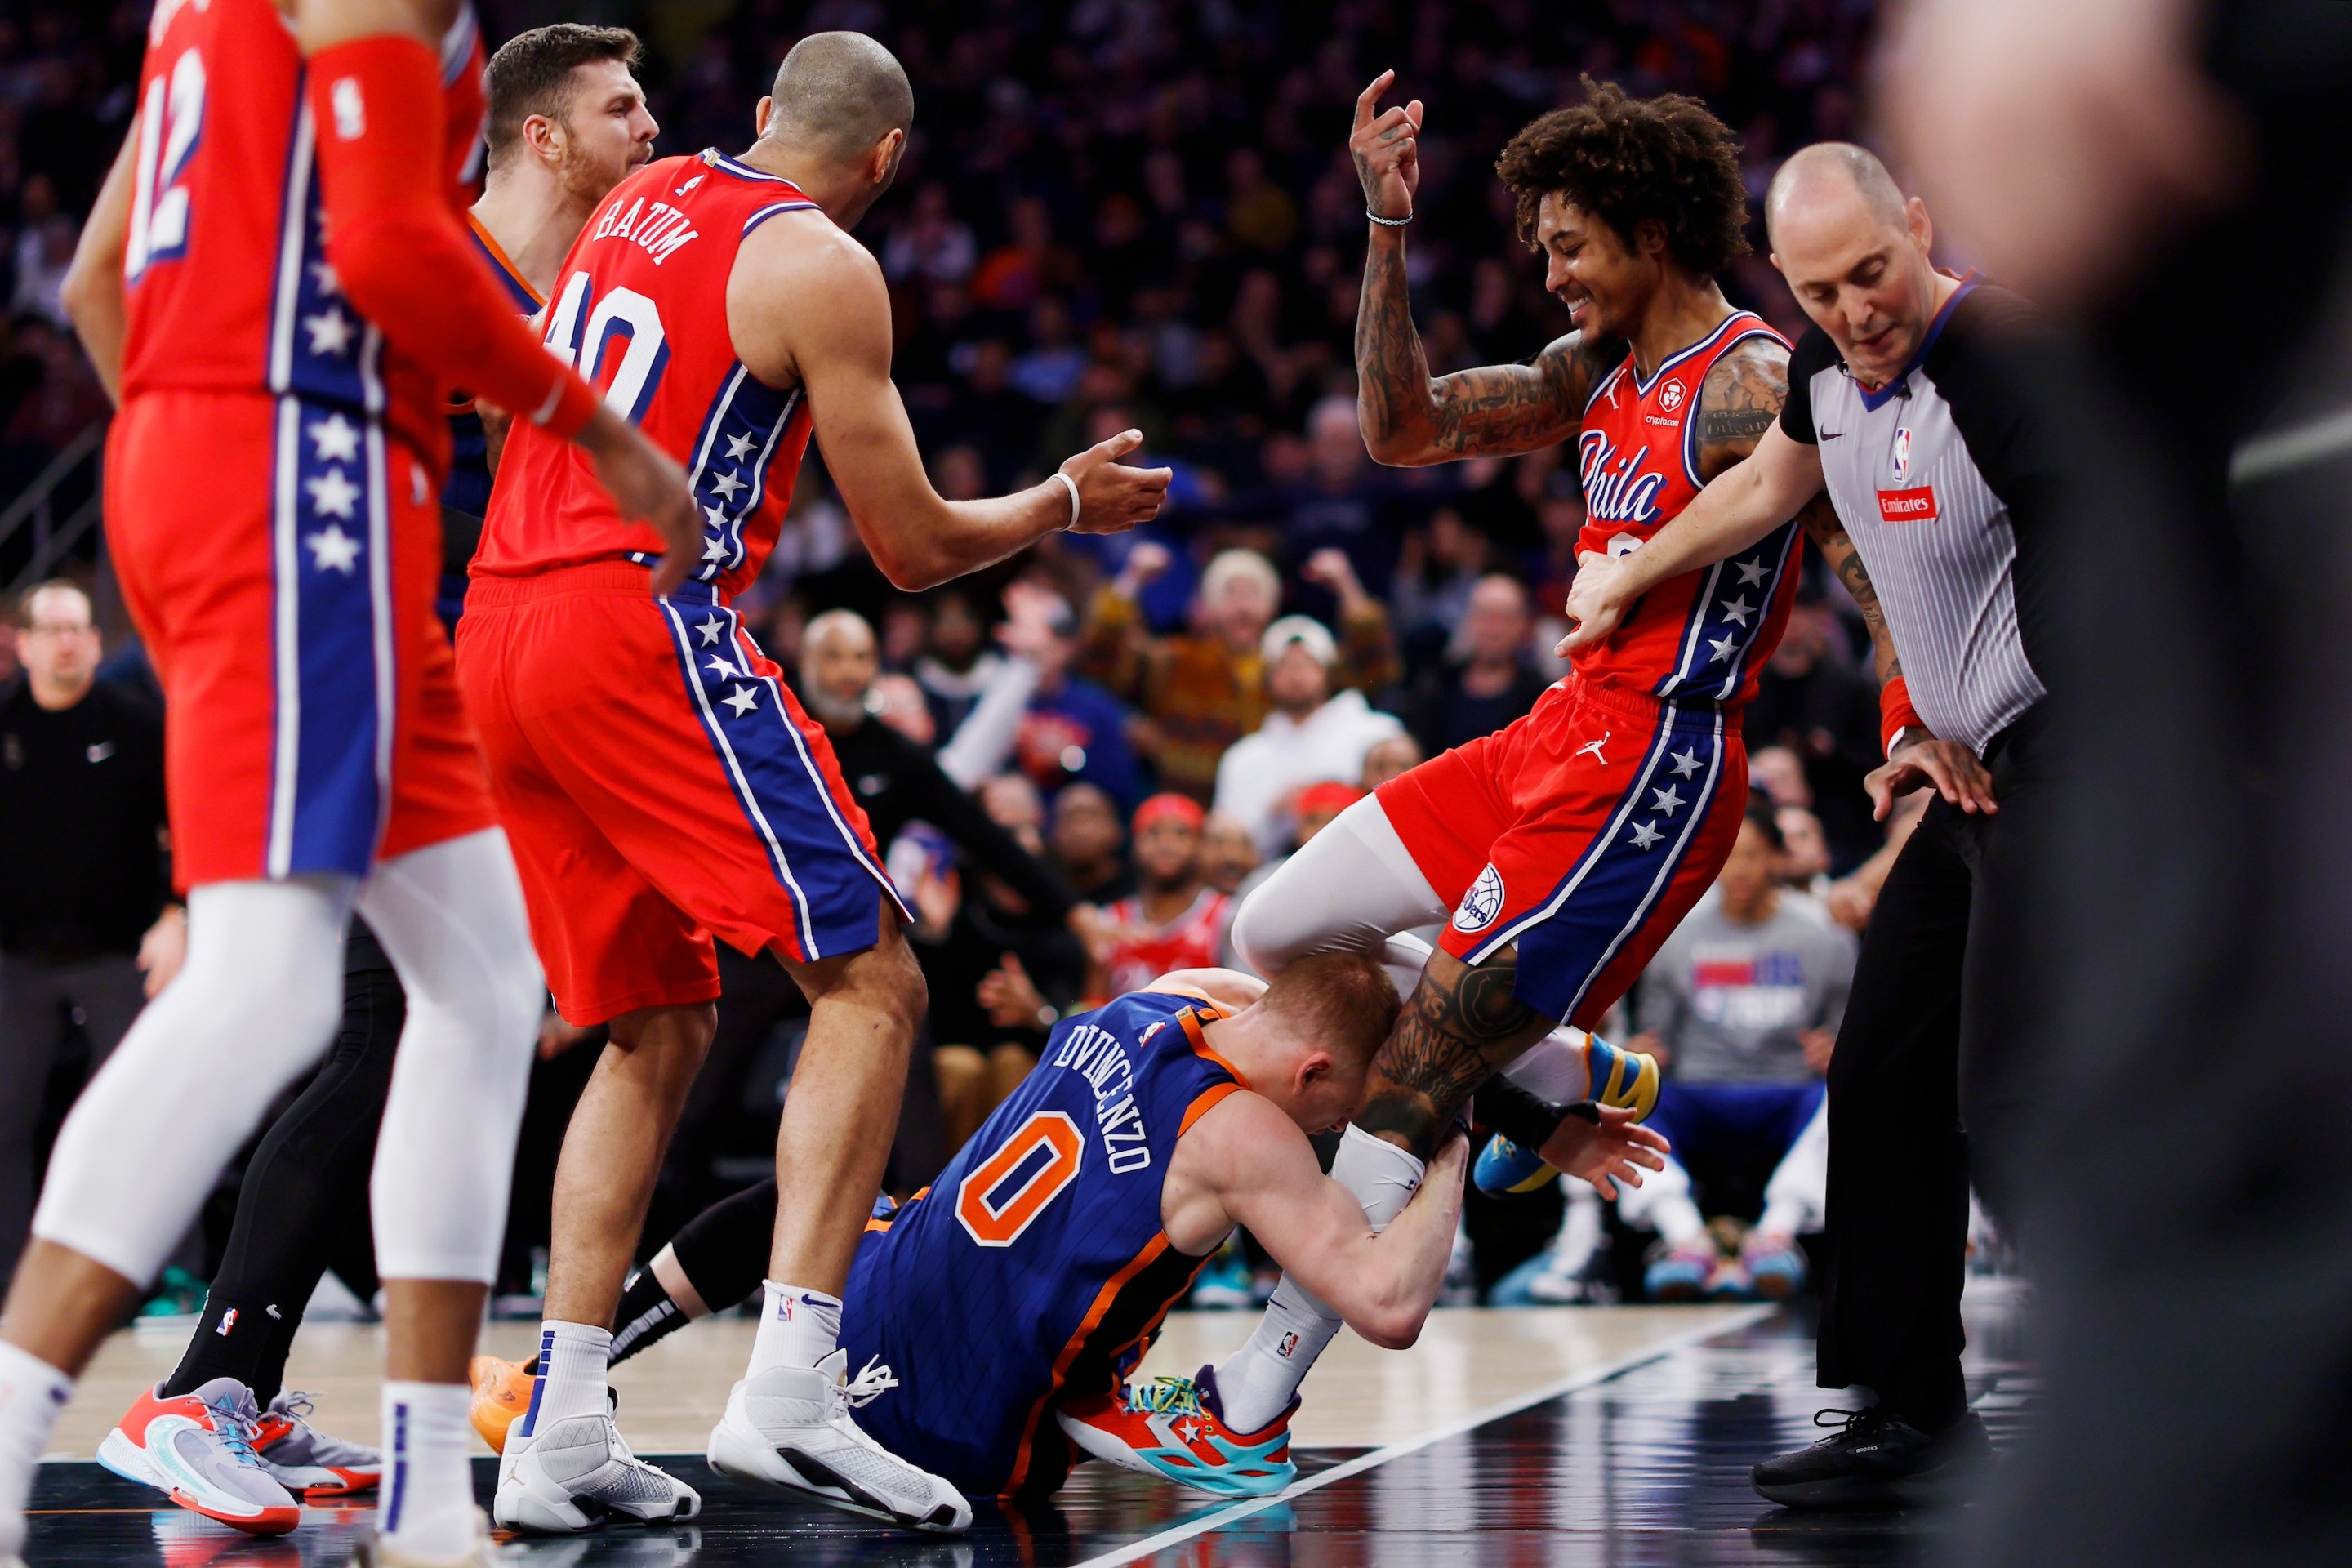 NEW YORK, NEW YORK - MARCH 10: Donte DiVincenzo #0 of the New York Knicks grabs Kelly Oubre Jr. #9 of the Philadelphia 76ers starting an altercation during the second half at Madison Square Garden on March 10, 2024 in New York City. The 76ers won 79-73. NOTE TO USER: User expressly acknowledges and agrees that, by downloading and or using this photograph, User is consenting to the terms and conditions of the Getty Images License Agreement. (Photo by Sarah Stier/Getty Images)